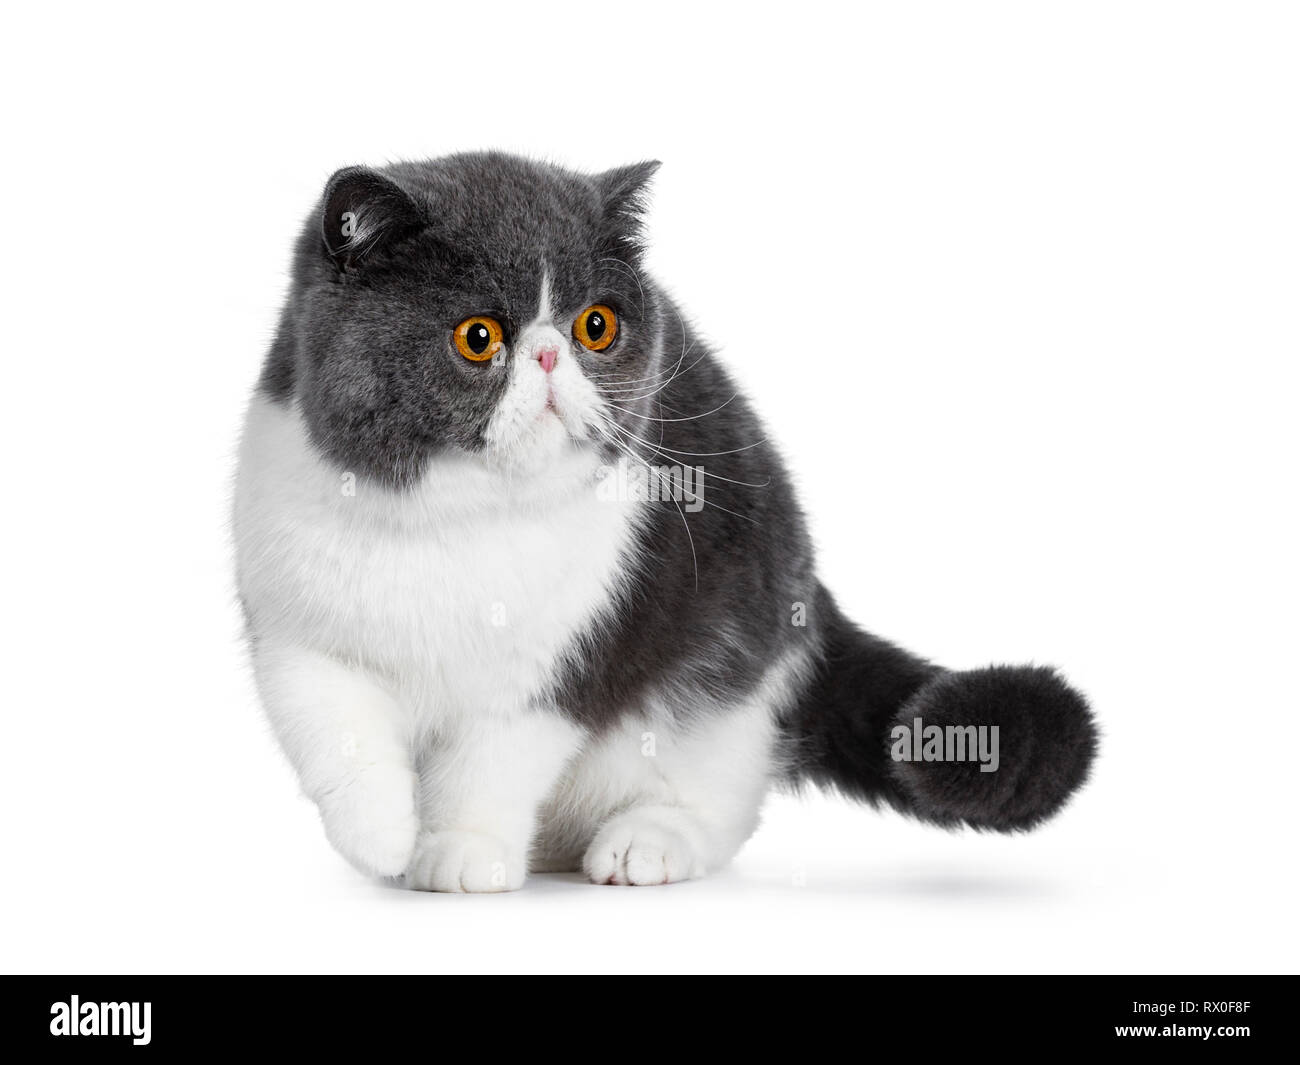 Blue with white young Exotic Shorthair cat, standing / walking facing front. Looking to the side with amazing round orange eyes. Isolated on white bac Stock Photo